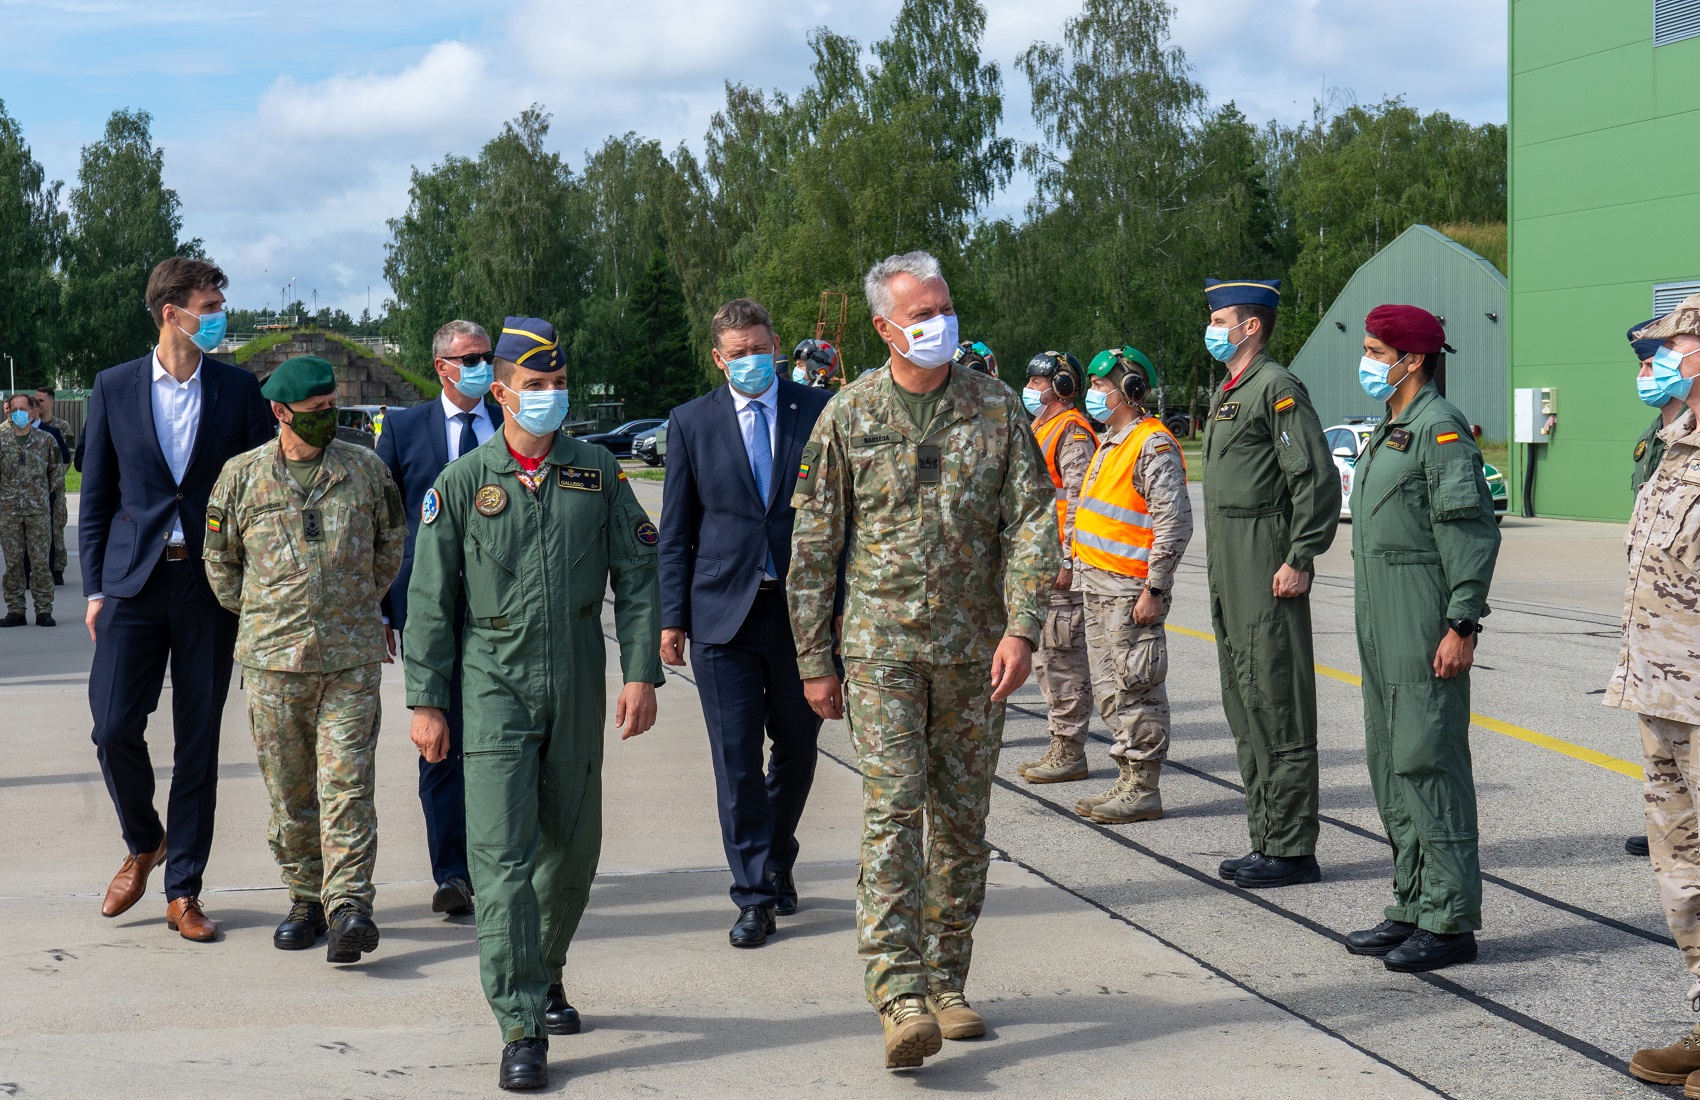 The president of the republic of Lithuania visits detachment 'Vilkas'